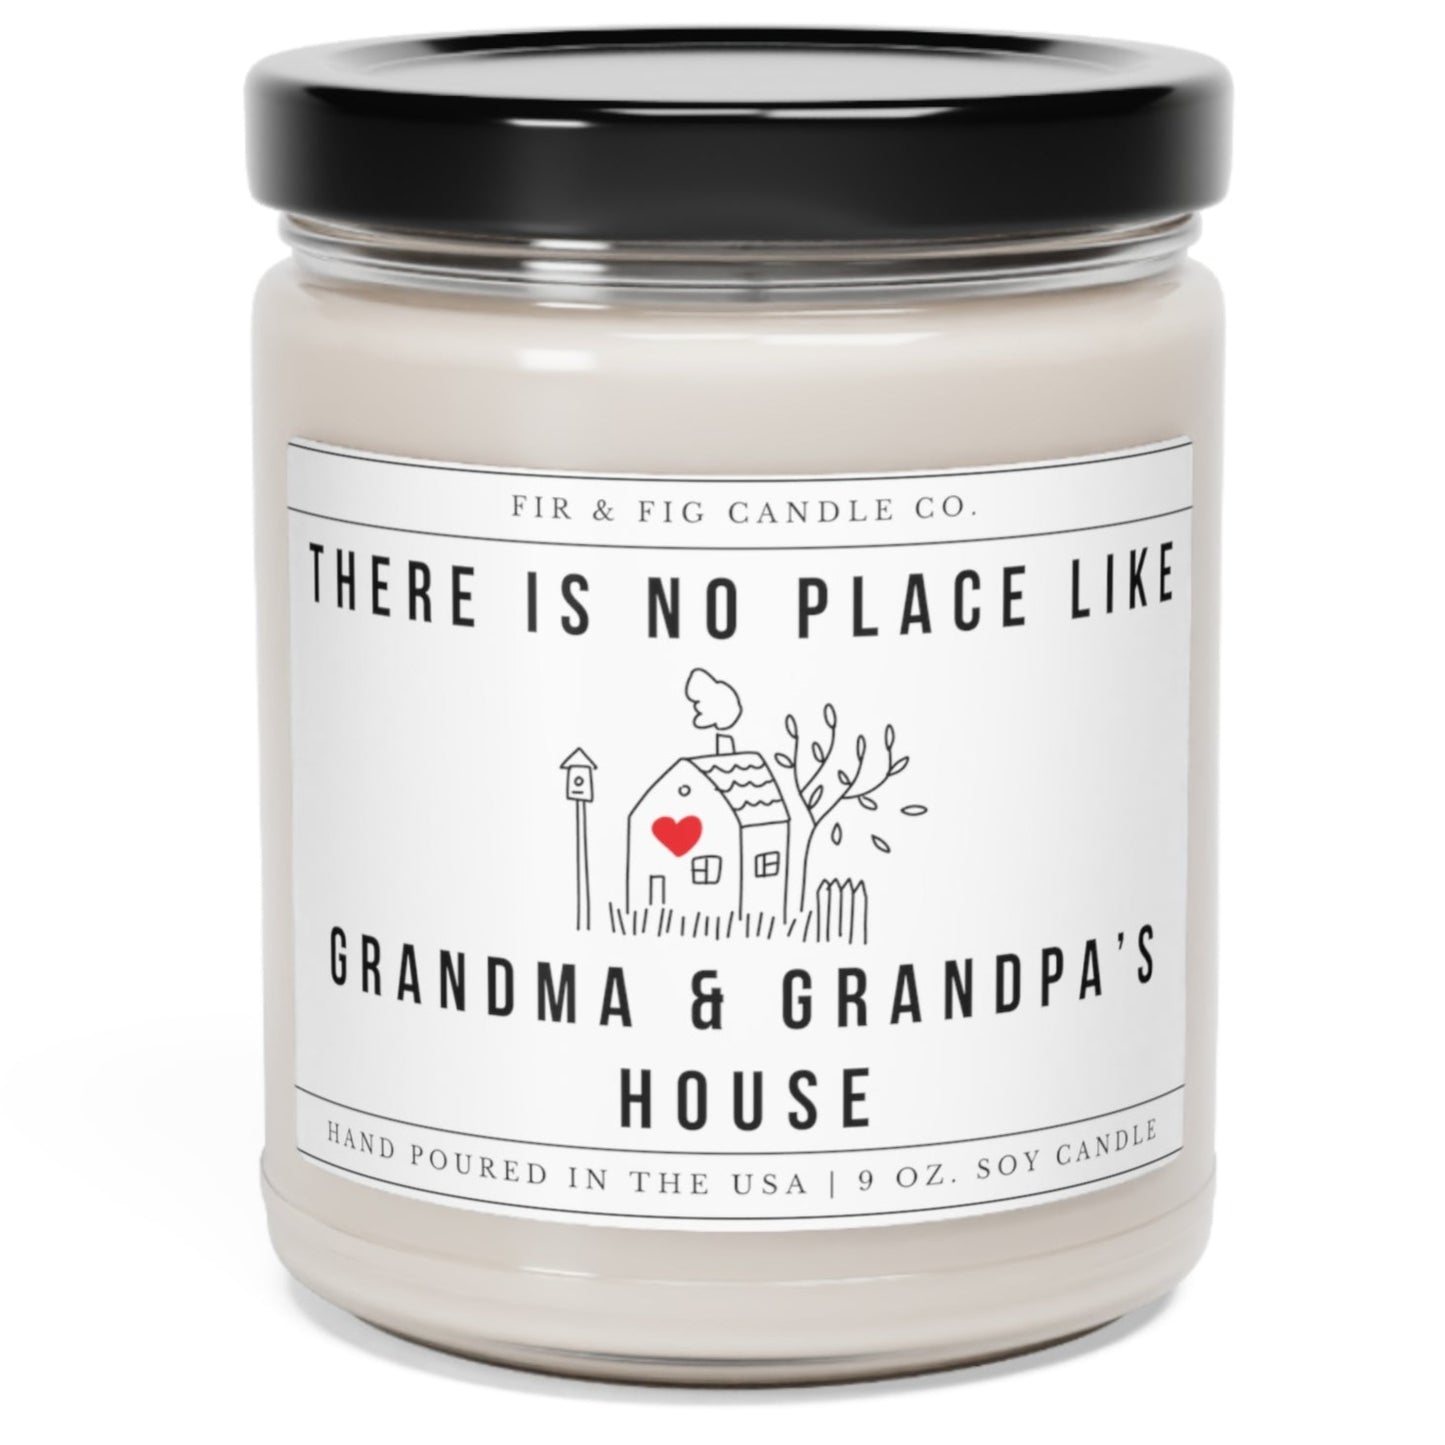 There Is No Place Like Grandma and Grandpa's House 100% Eco-Friendly 9oz Soy Candle, Grandparents Day Gift, Fathers Day, Mothers Day Candle